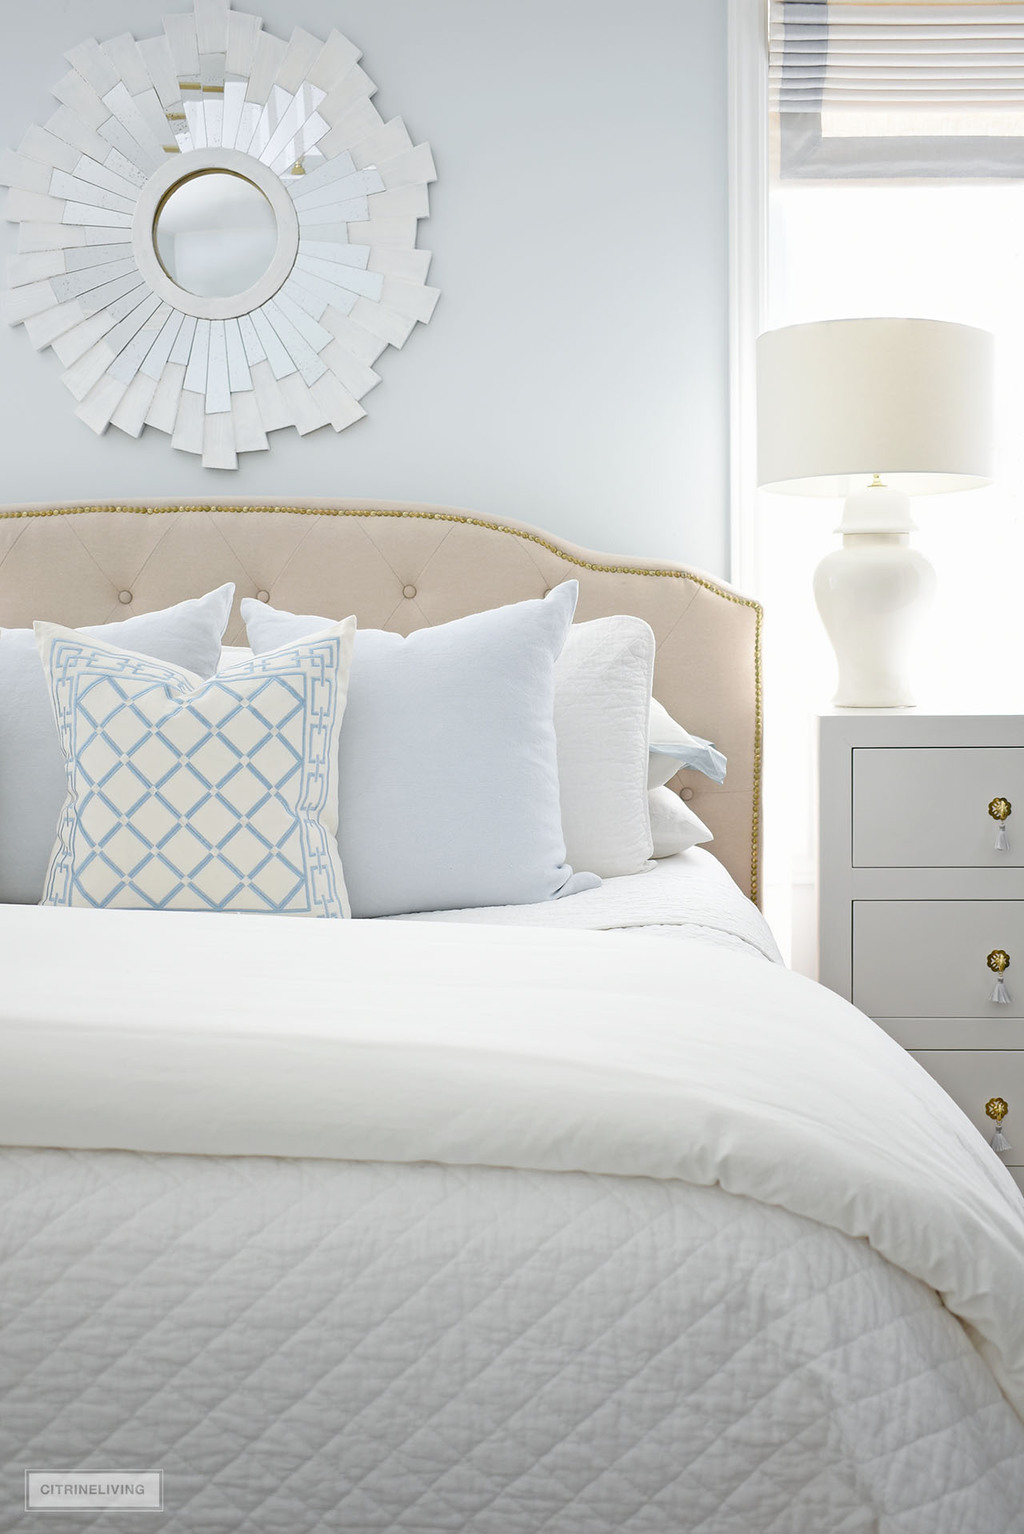 A beautiful layered bed with white quilt, soft blue and white throw pillows, a starburst mirror above the bed and a pretty ginger jar lamp on the bedside dresser.